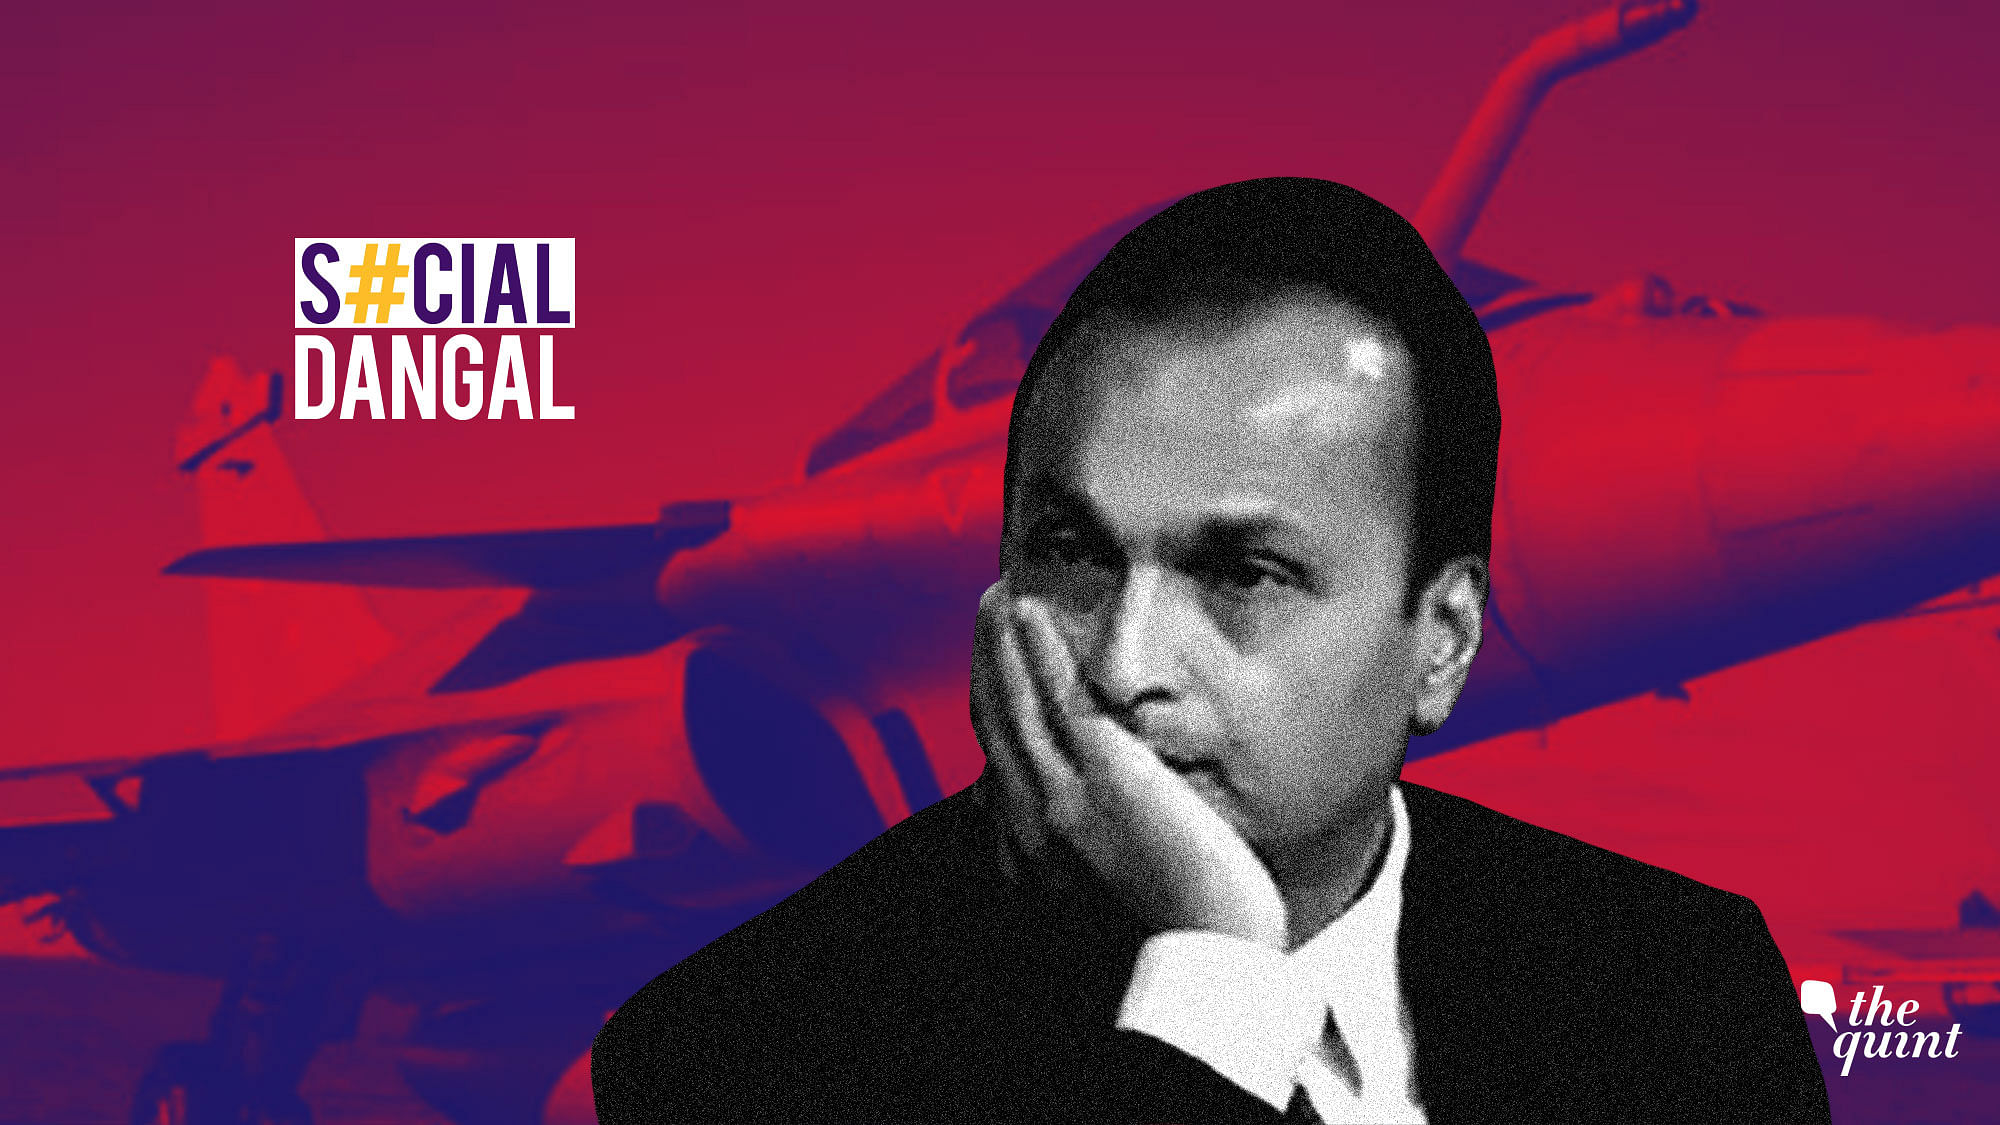 In an article dated 2015, Ambani advised that the defence sector be kept away from the 3 Cs – CBI, CVC and CAG.